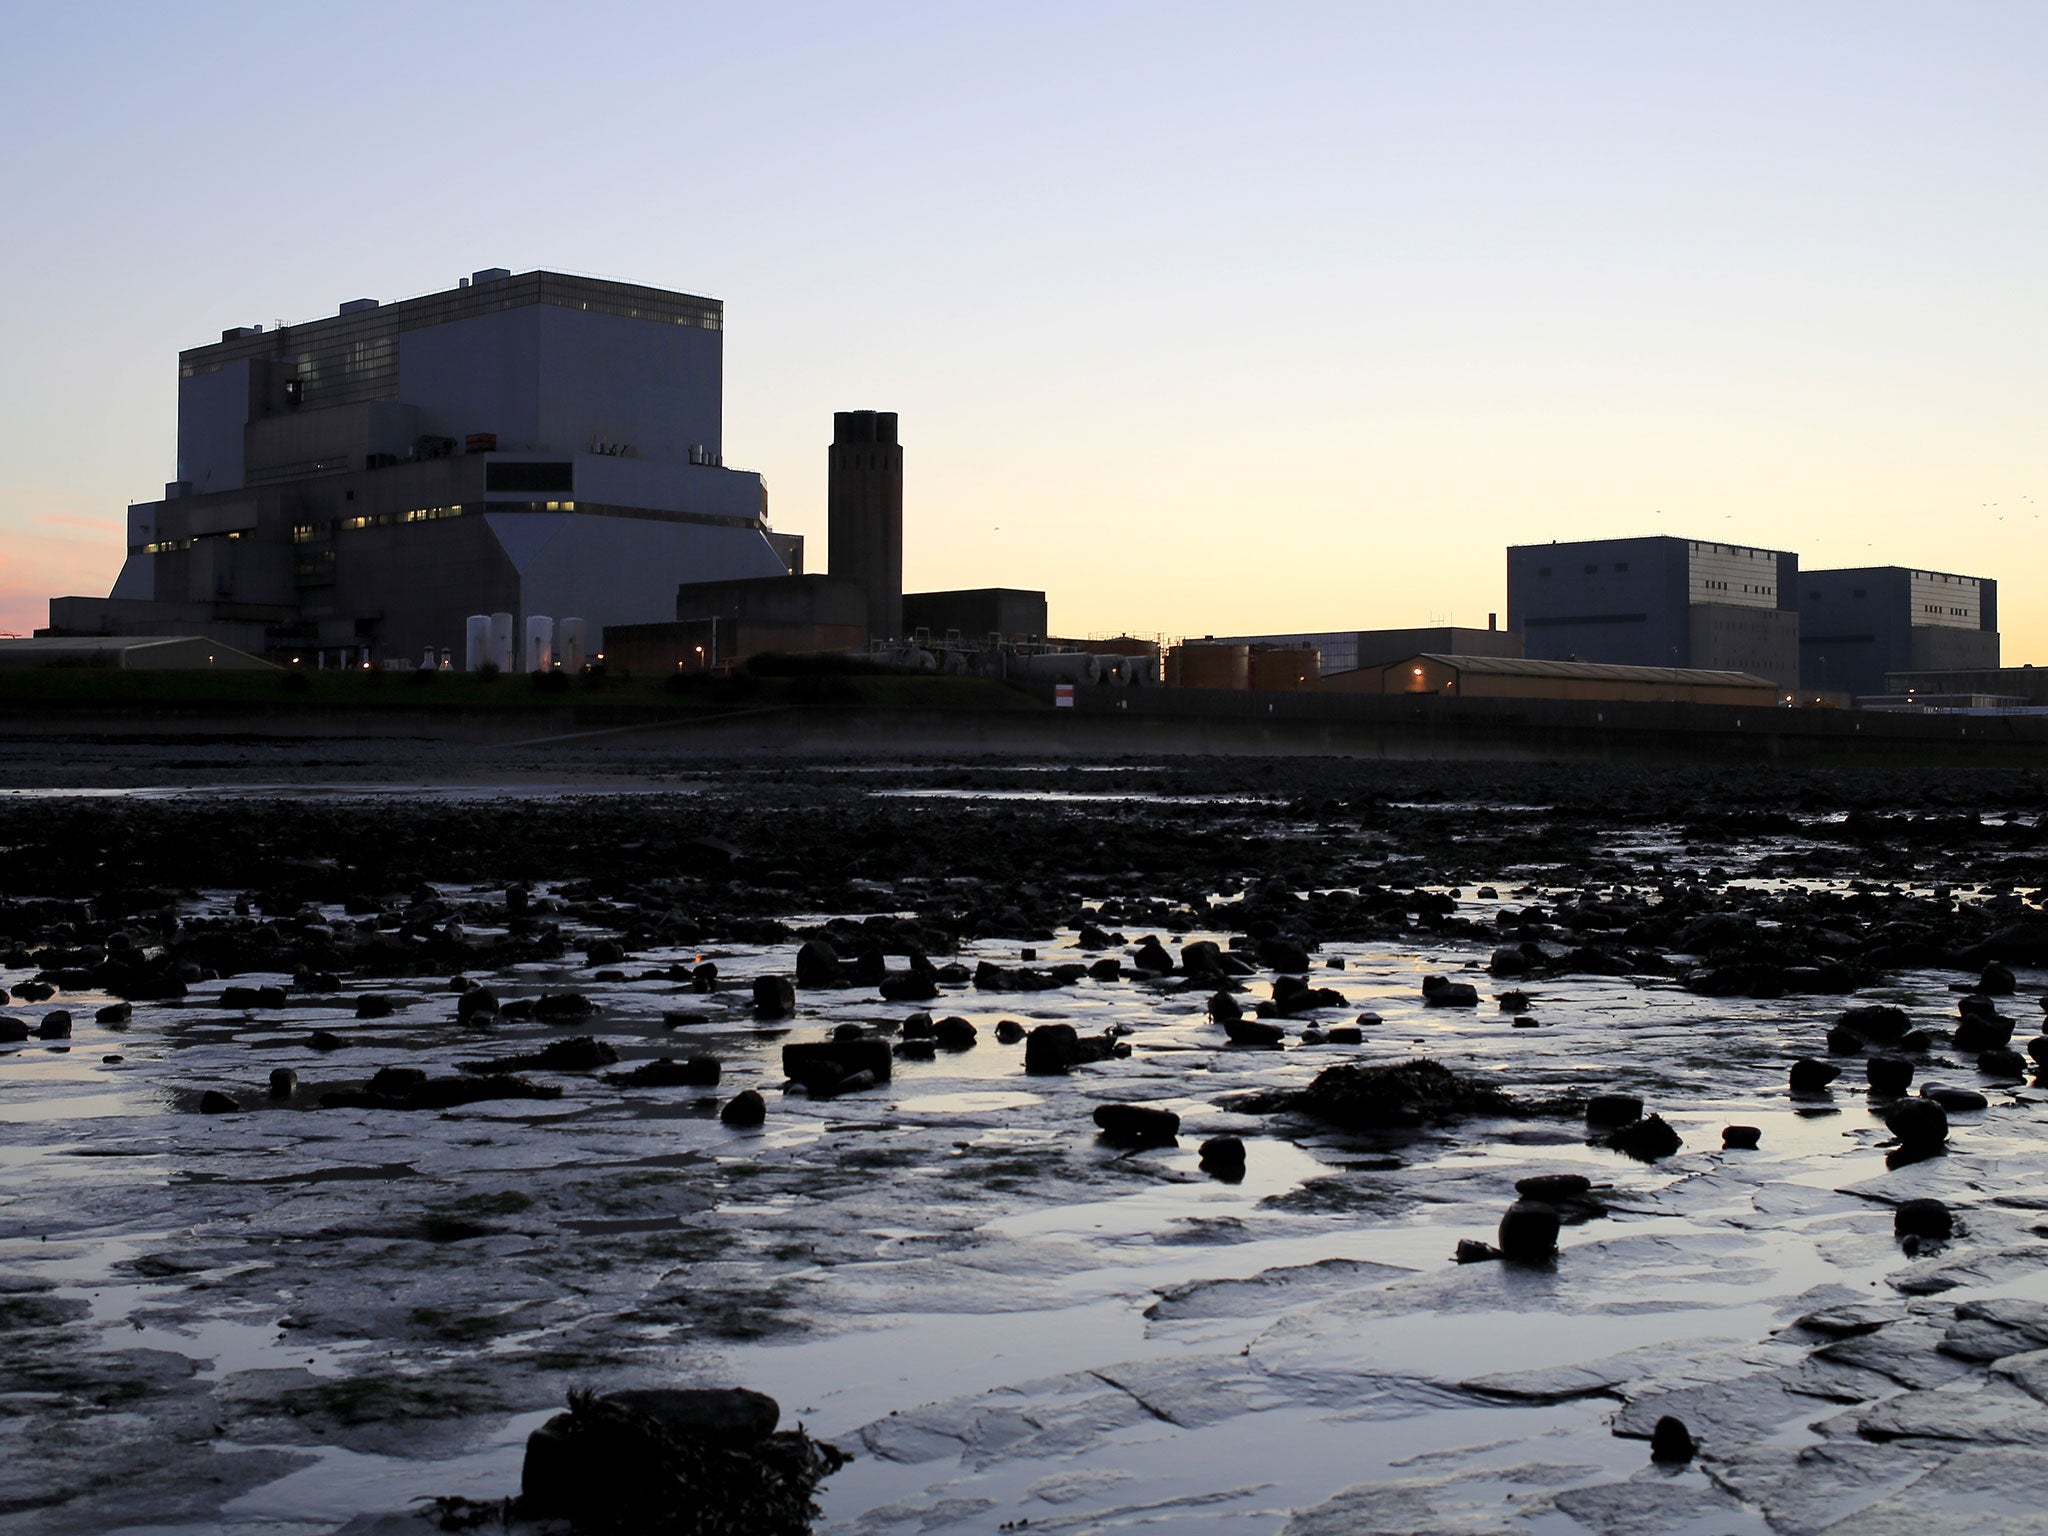 Hinkley Point power stations: Britain has not built a nuclear power station for 25 years but a new plant at Hinkley is planned to supply 7 per cent of Britain’s energy needs